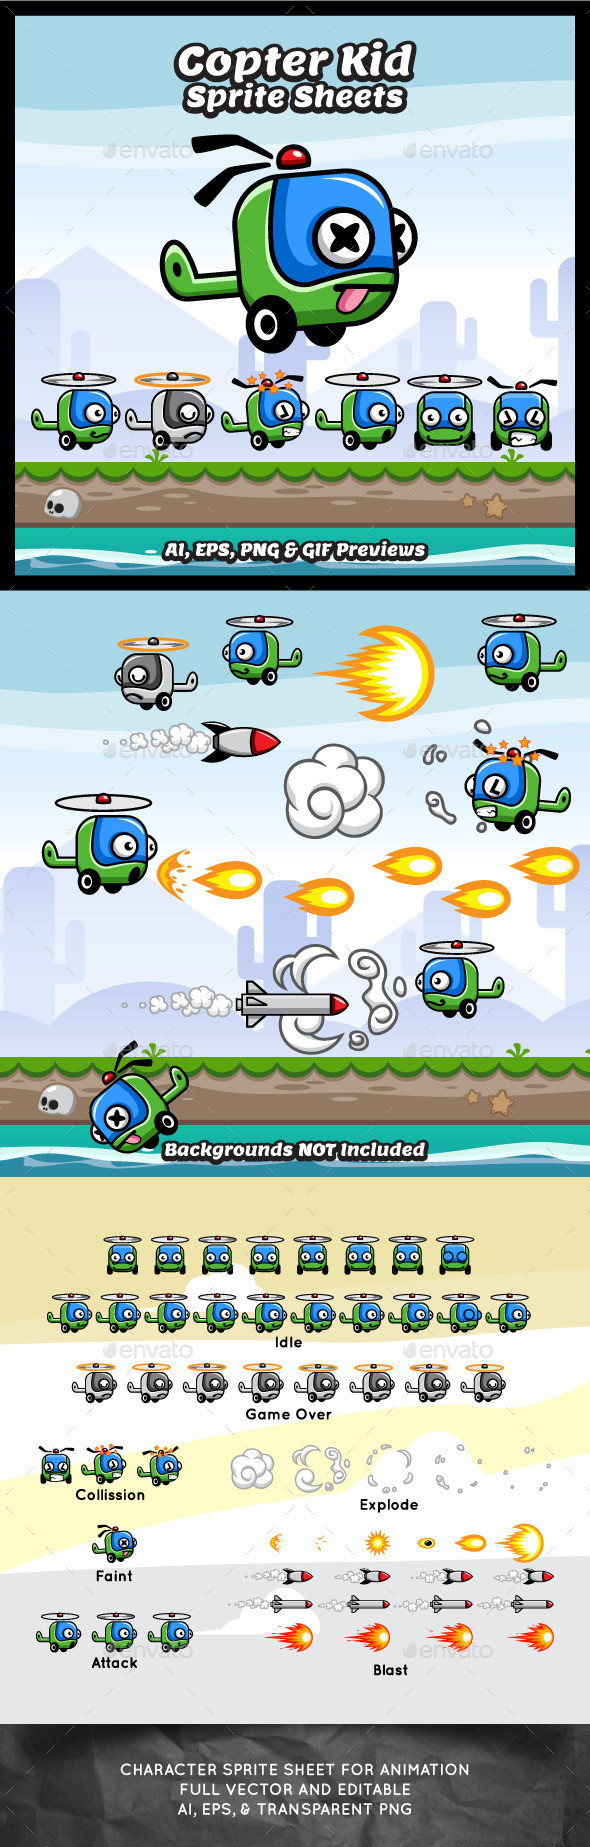 Copter kid swing copter game character sprite sheet sidescroller game asset flying flappy animation gui mobile games gameart game art 590